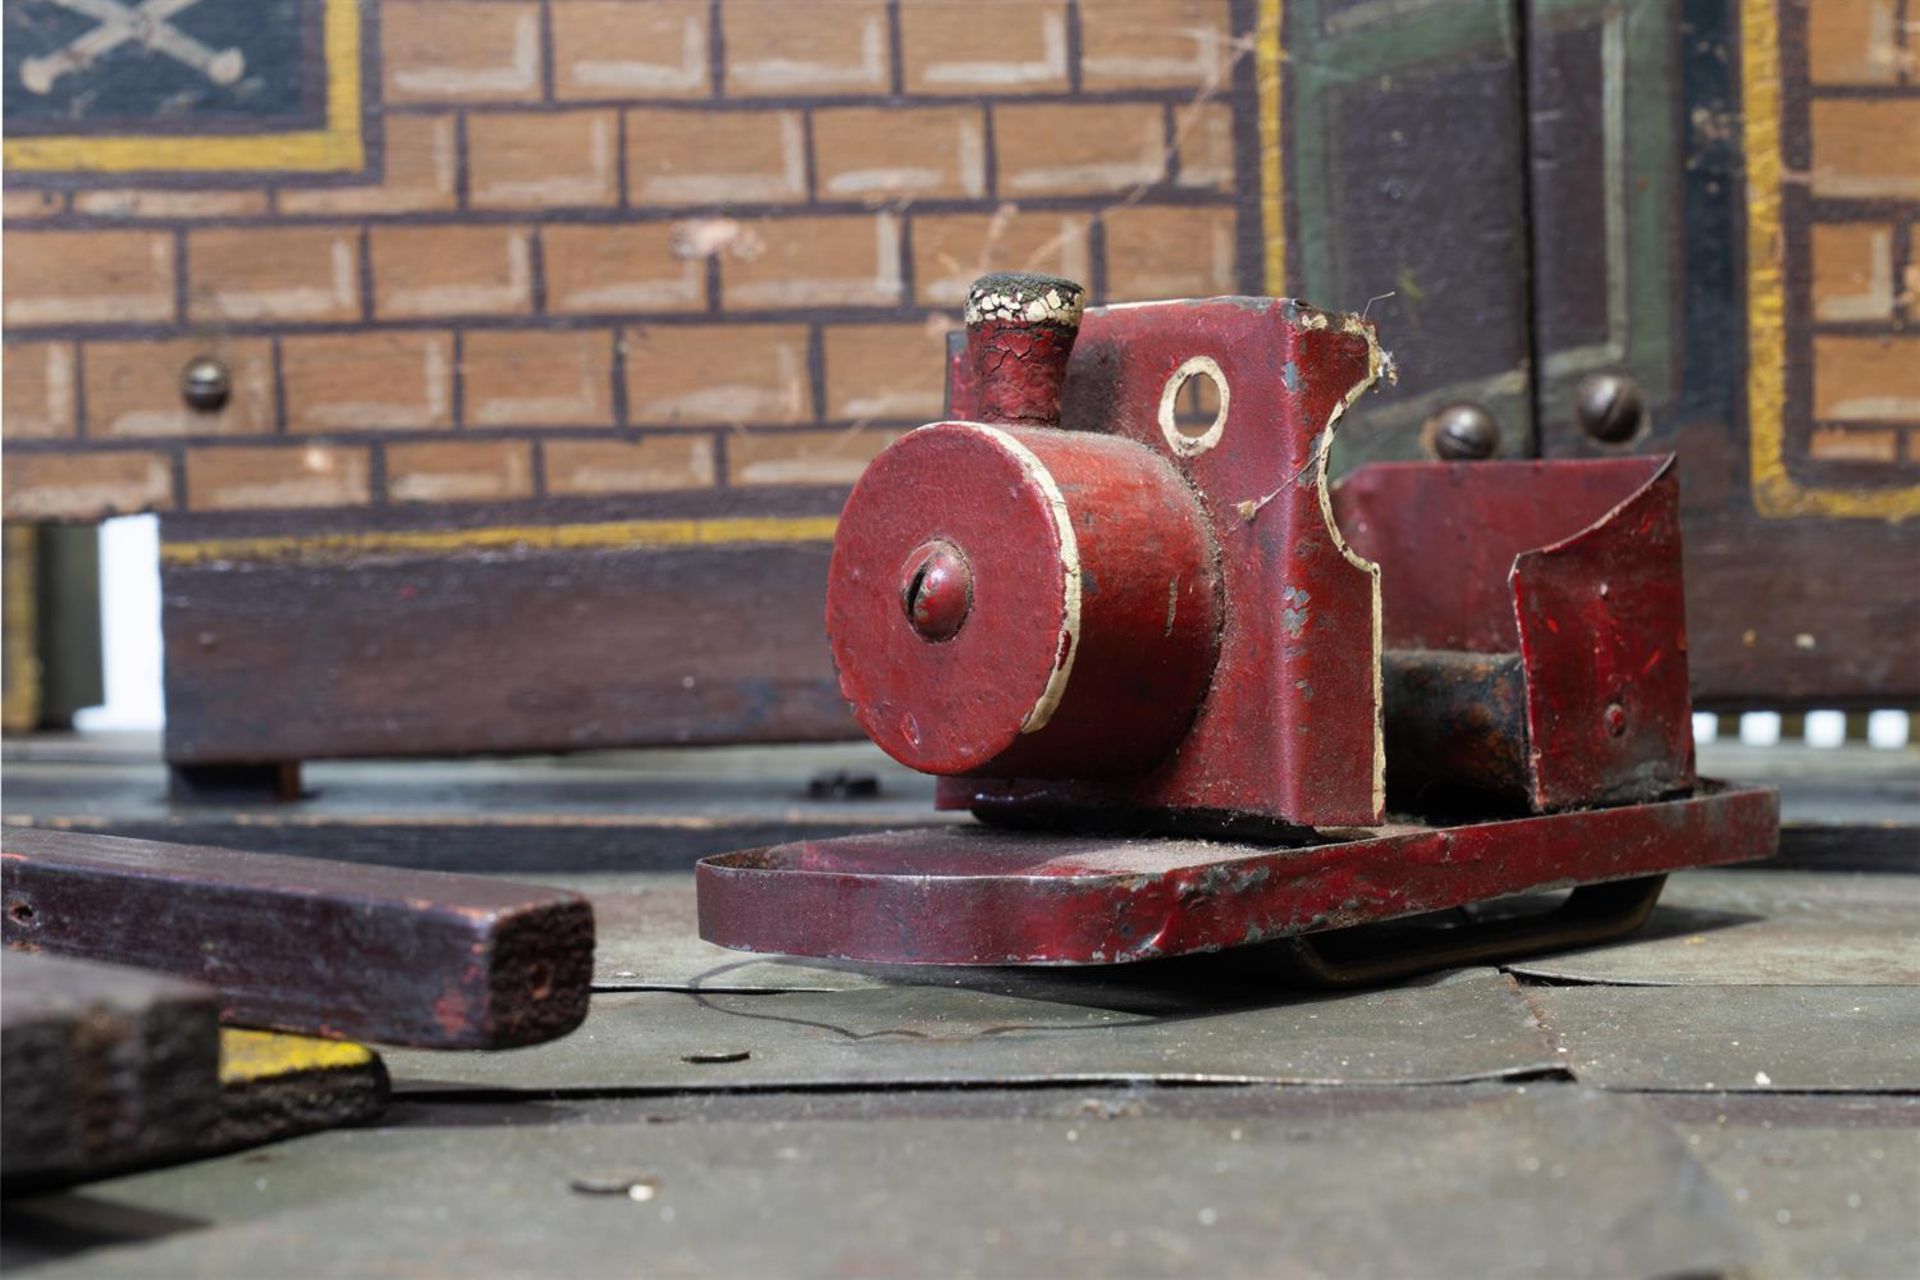 A SCRATCHBUILT PAINTED WOOD AND METAL SCALE MODEL AMUSEMENT GHOST TRAIN RIDE, 20TH CENTURY - Image 5 of 5